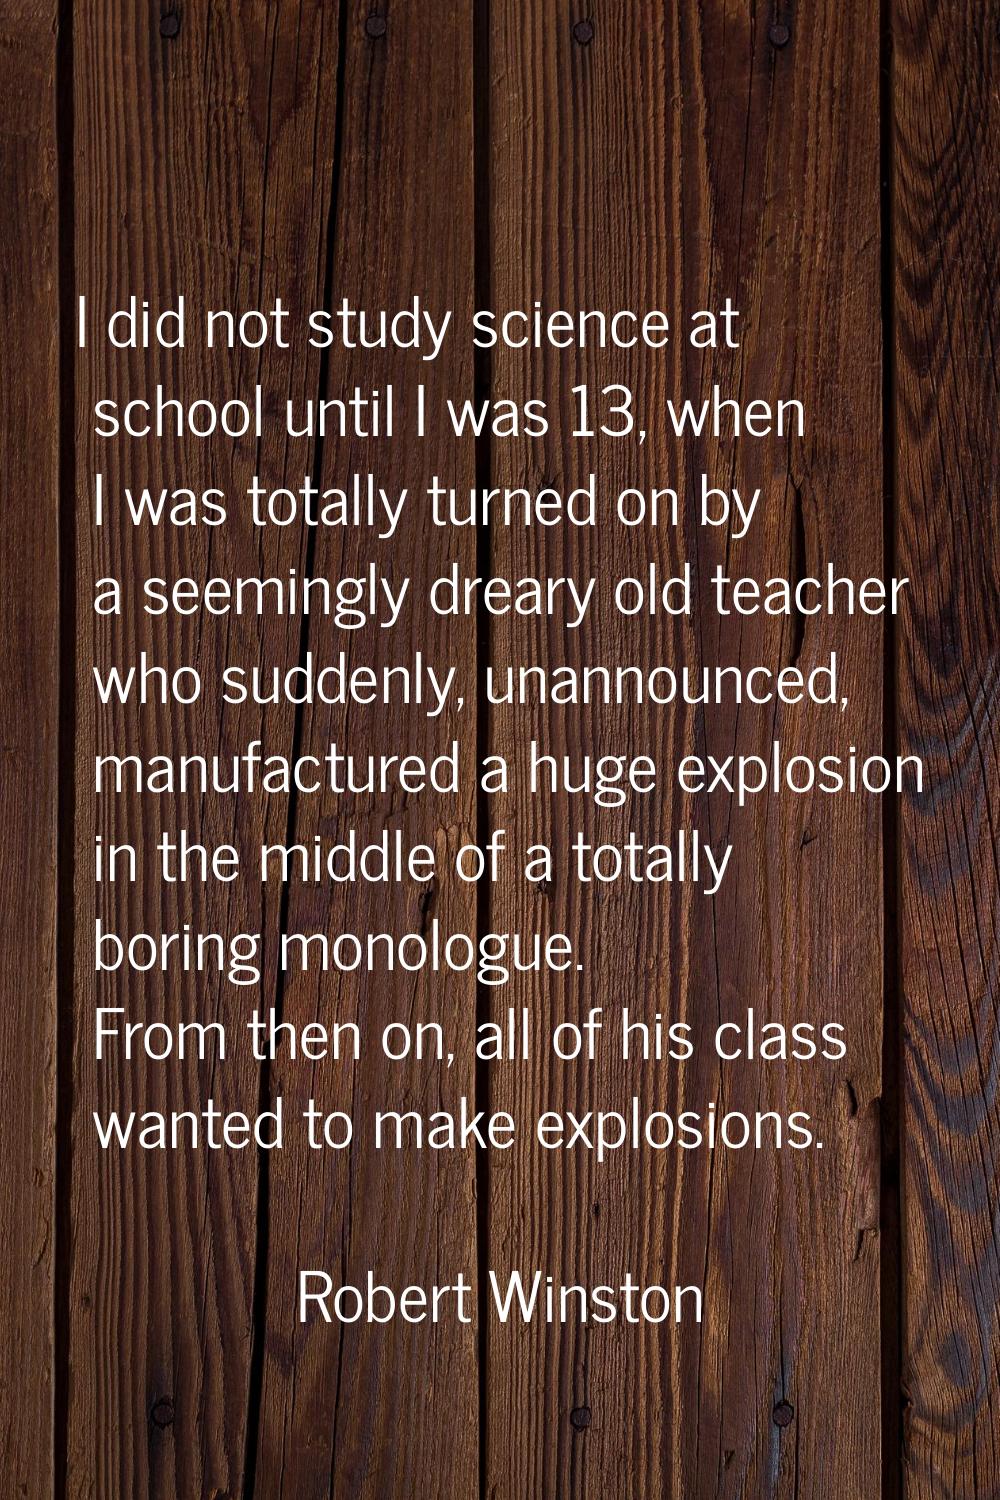 I did not study science at school until I was 13, when I was totally turned on by a seemingly drear